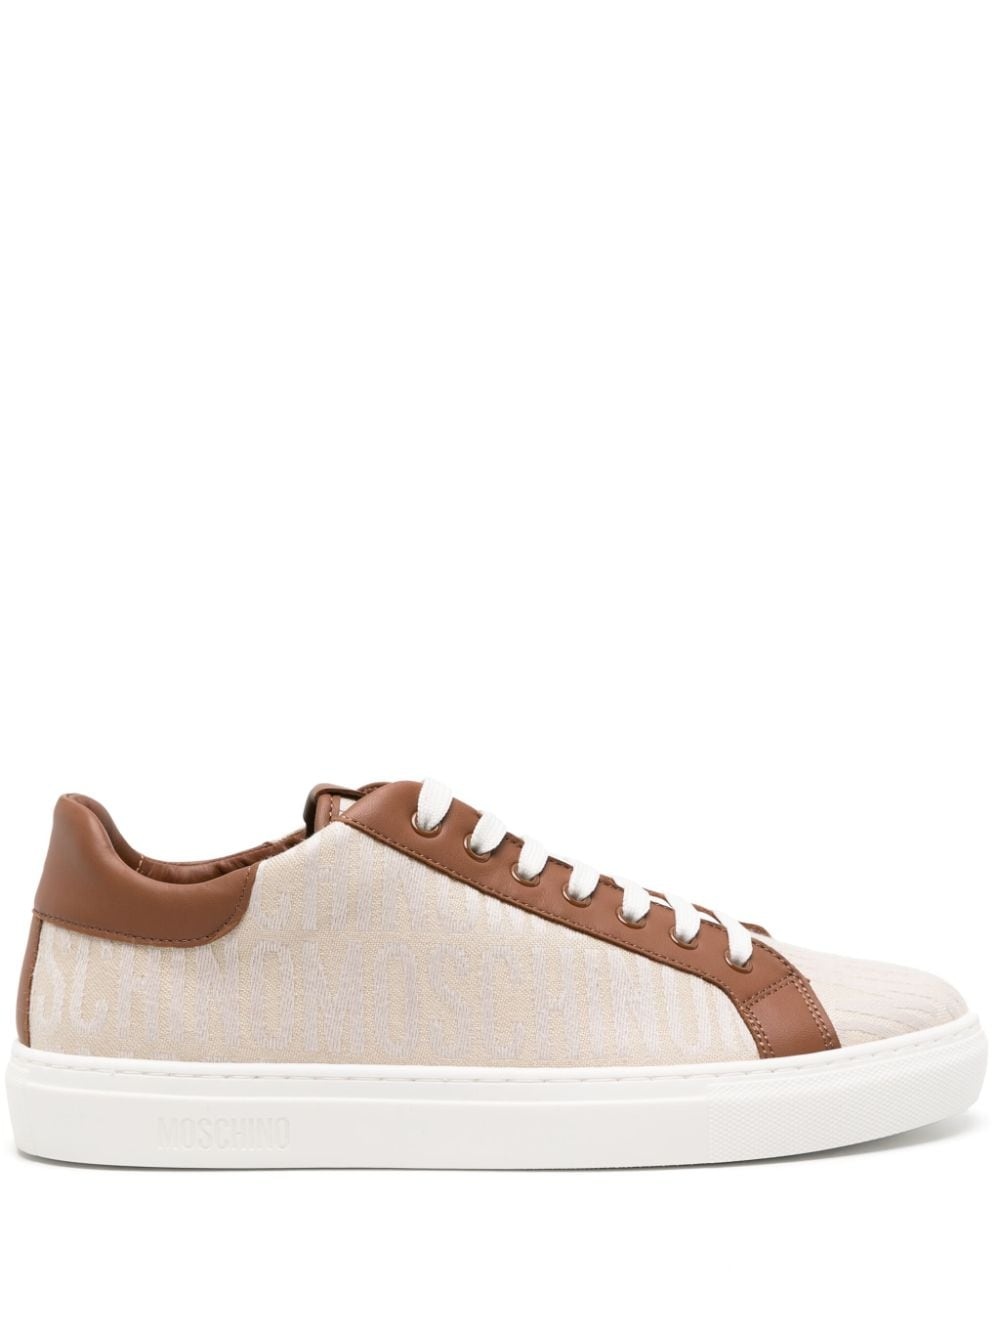 embroidered-logo panelled-leather sneakers - 1